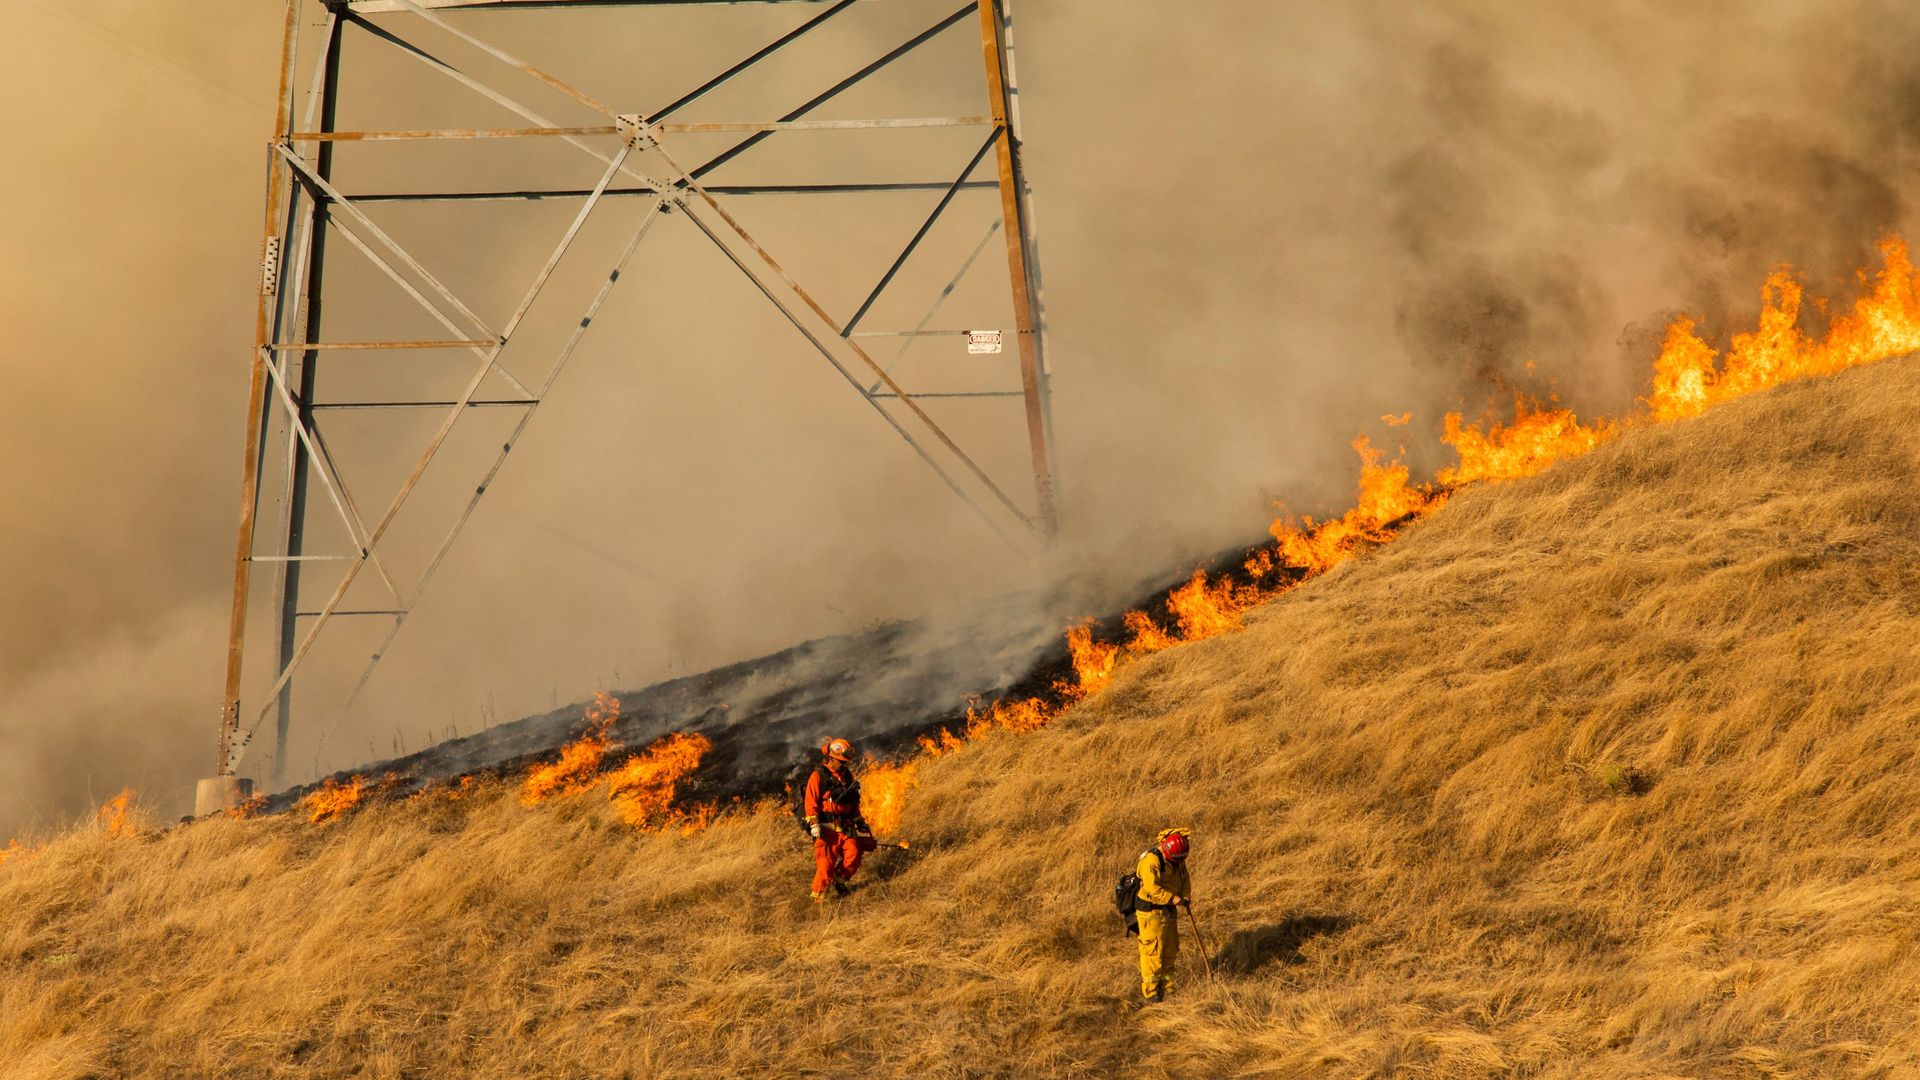 Firefighters set a back fire along a hillside near PG&E power lines during firefighting operations to battle the Kincade Fire in Healdsburg, California on October 26, 2019. 